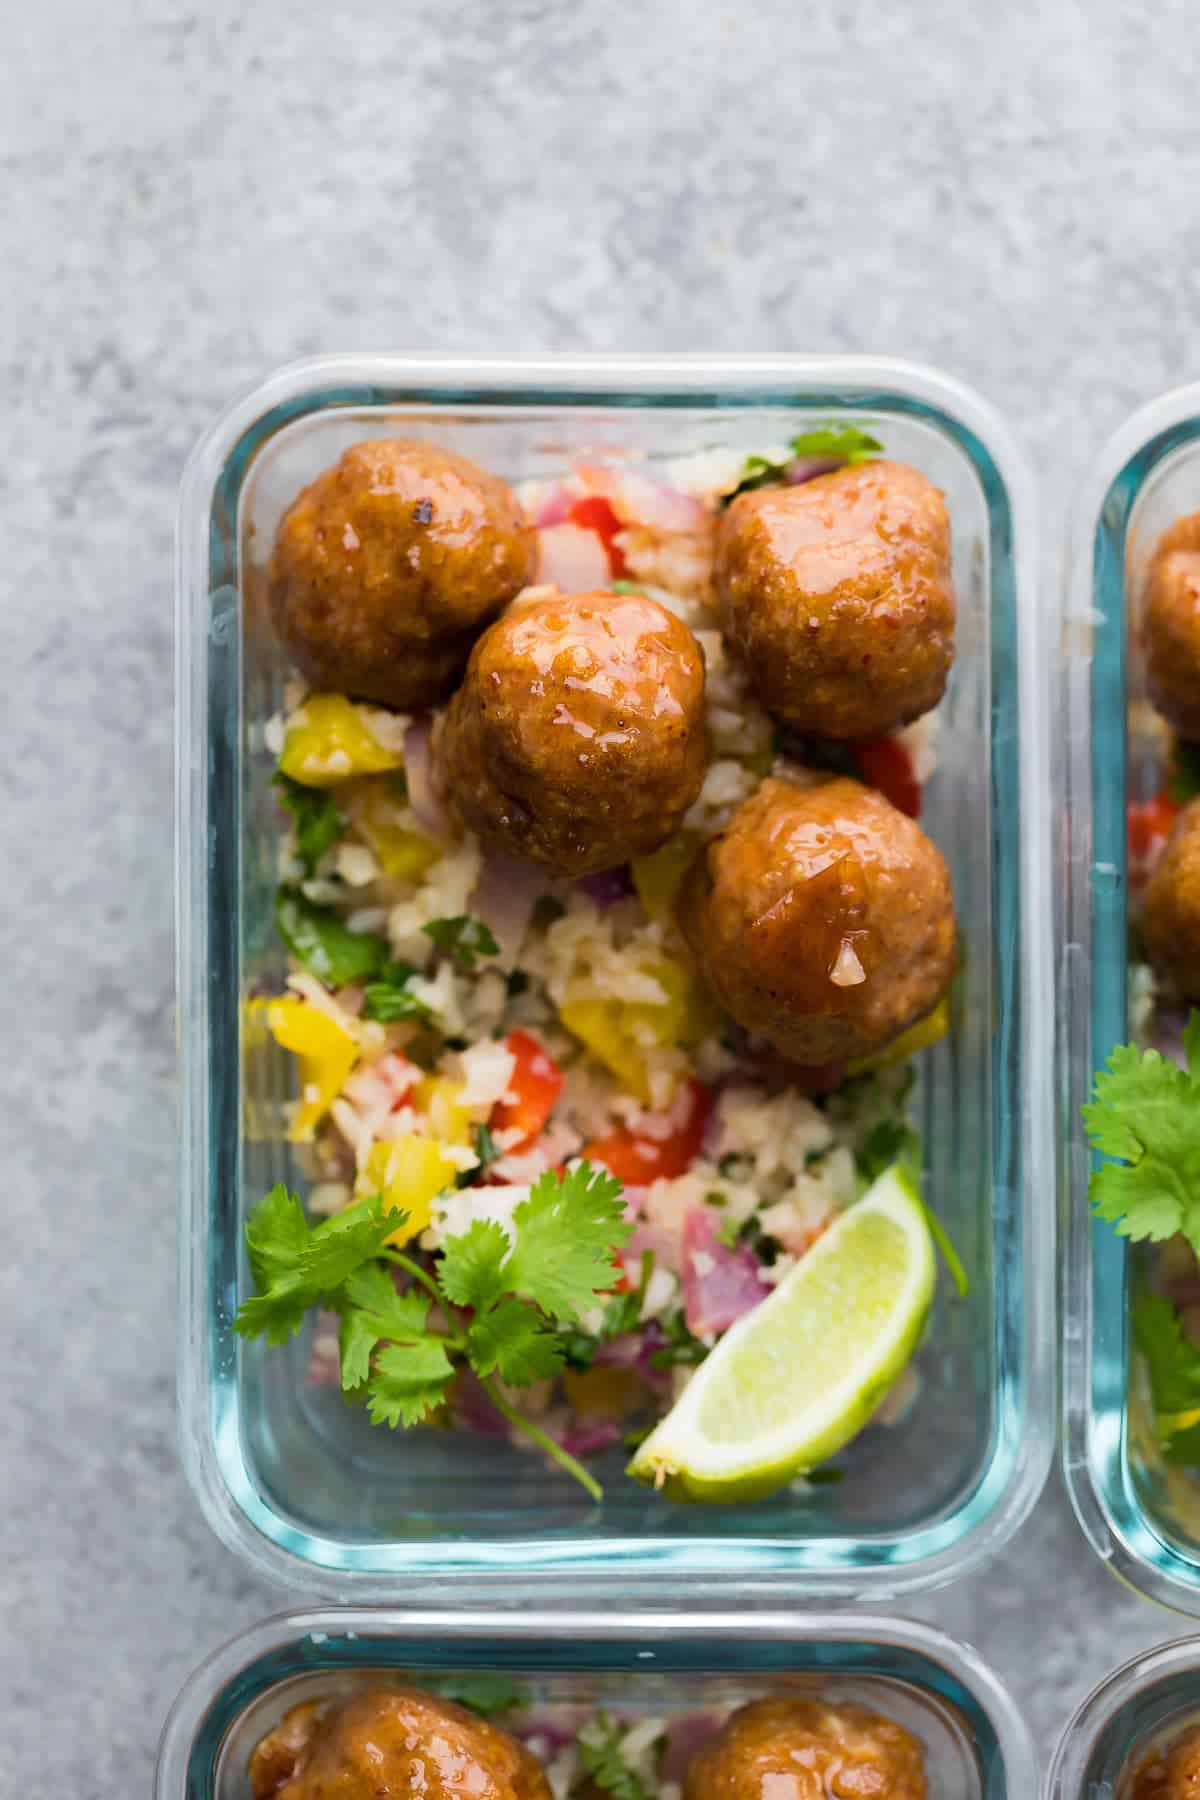 Honey Chipotle Meatball Meal Prep Bowls (+ video) - Sweet Peas and Saffron